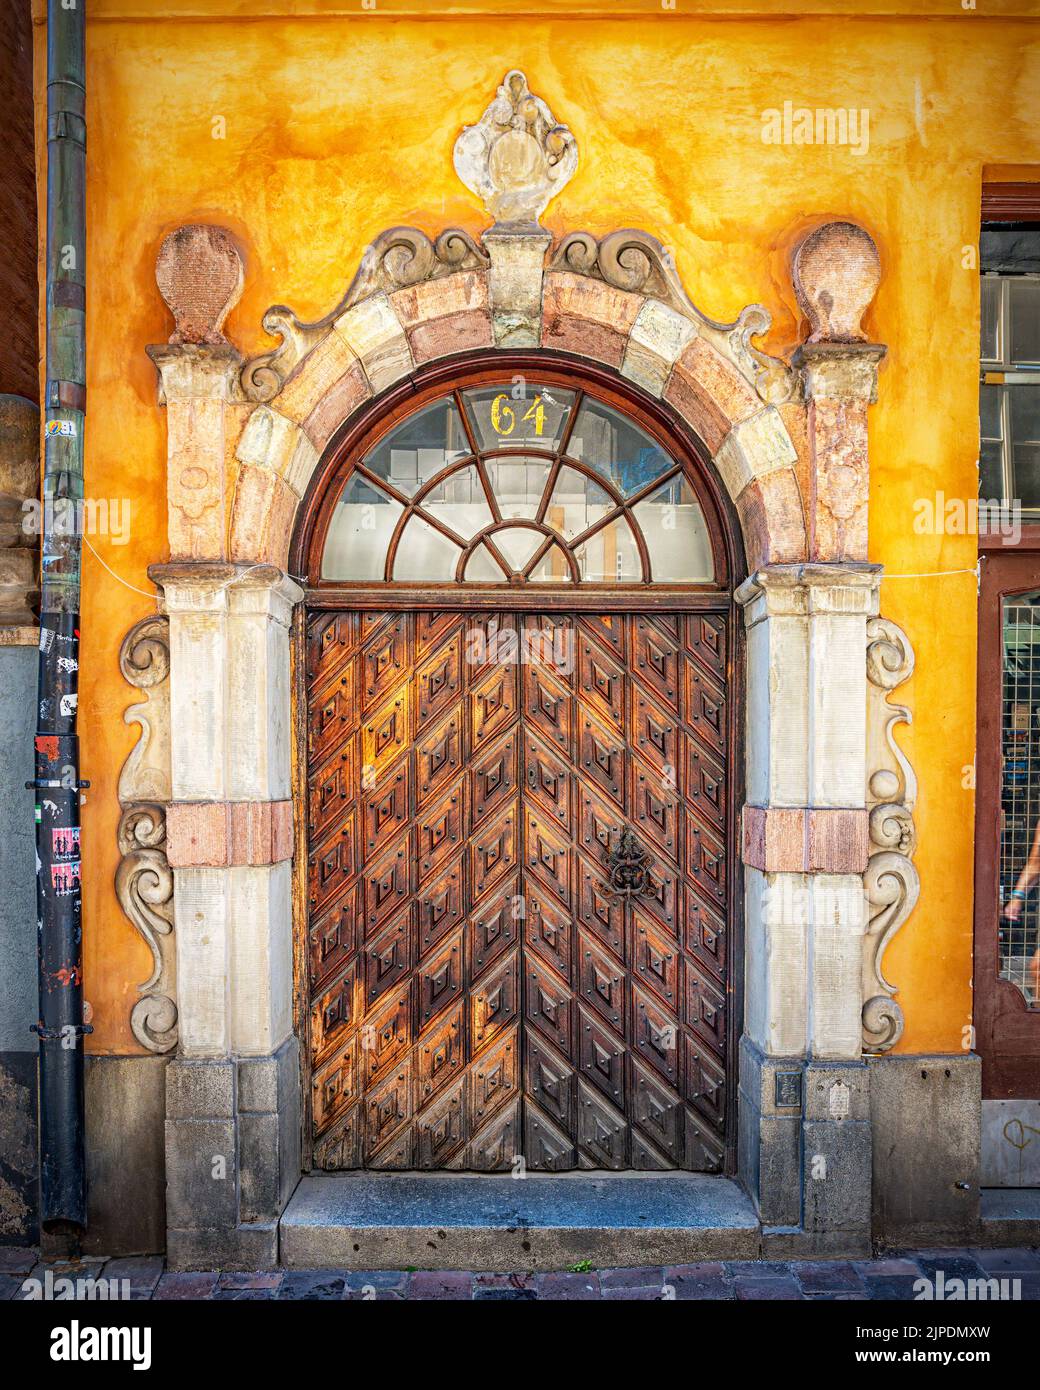 STOCKHOLM, SWEDEN - JULY 31, 2022: A typically ornate wooden door found in the gamla stan area Stock Photo